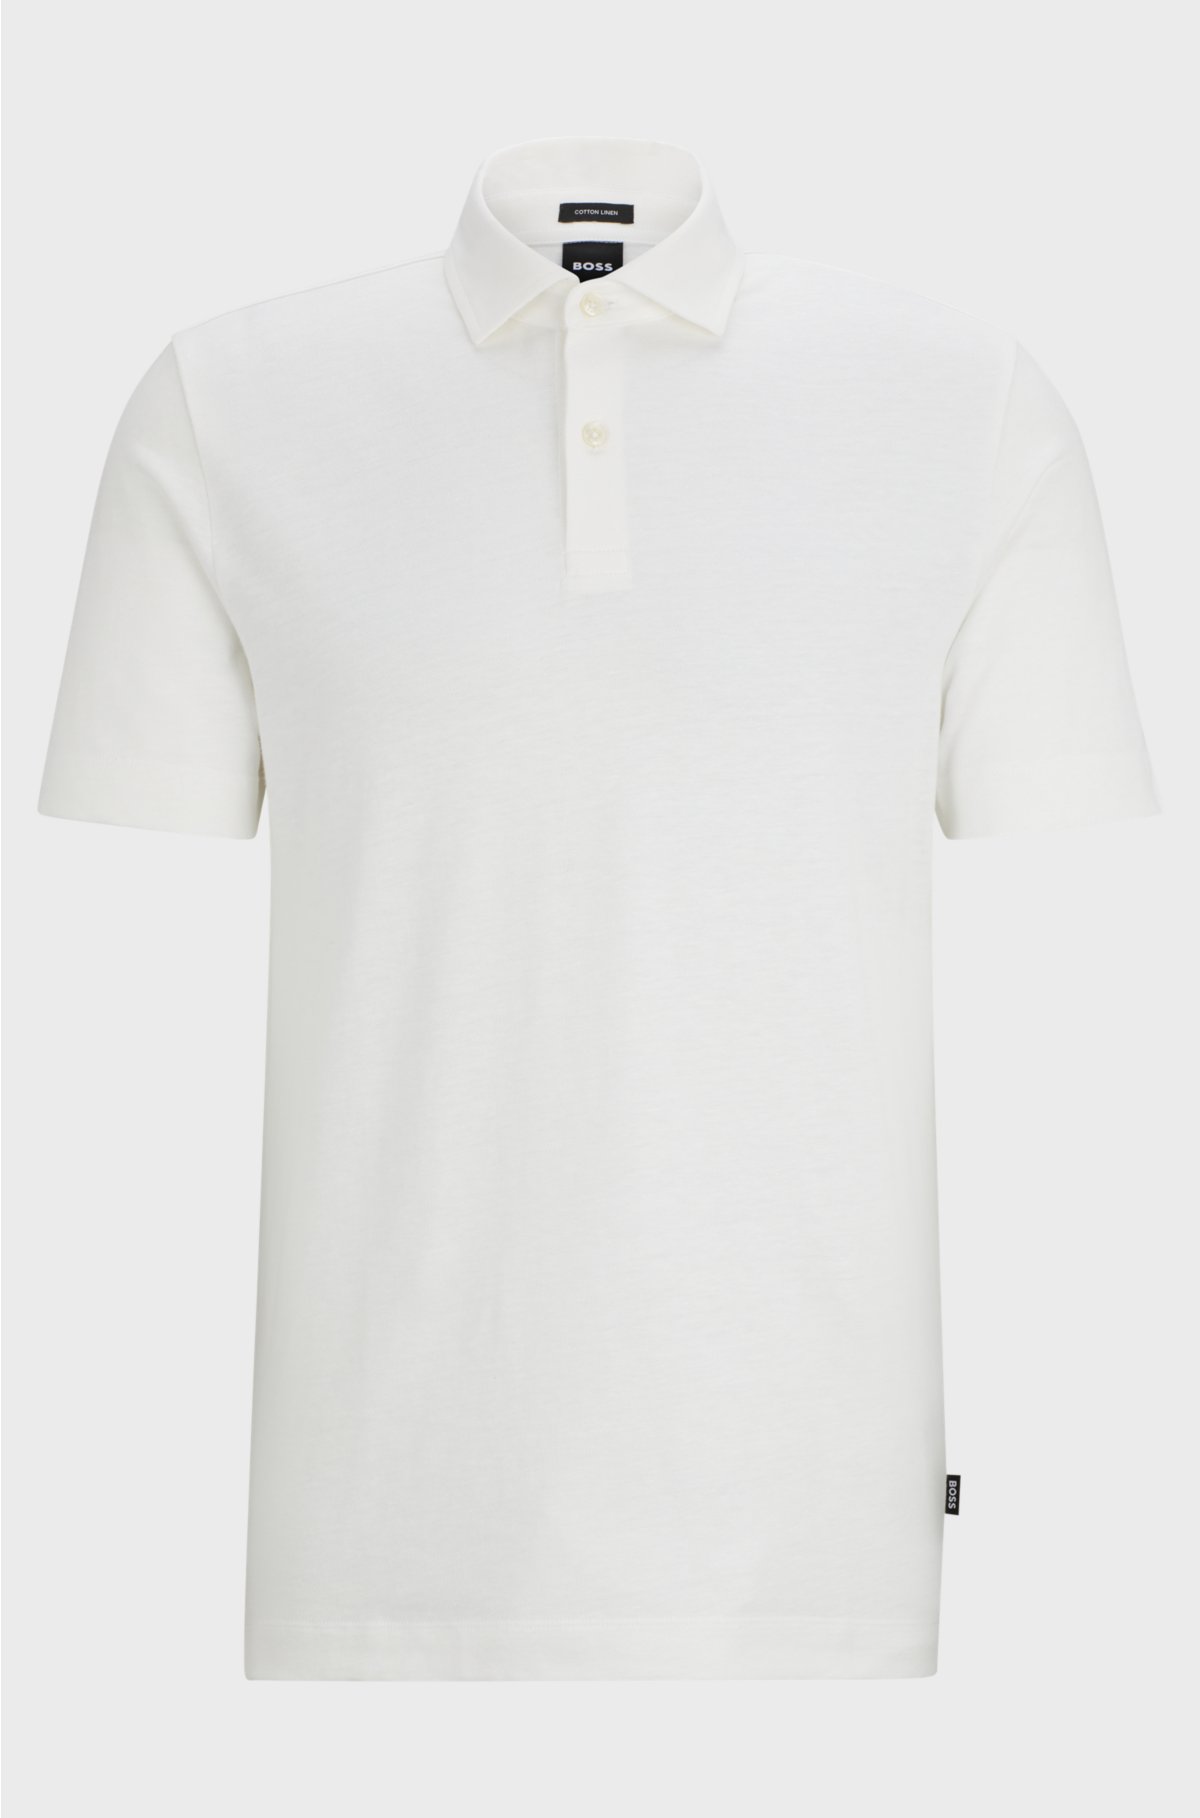 Regular-fit polo shirt in cotton and linen, White